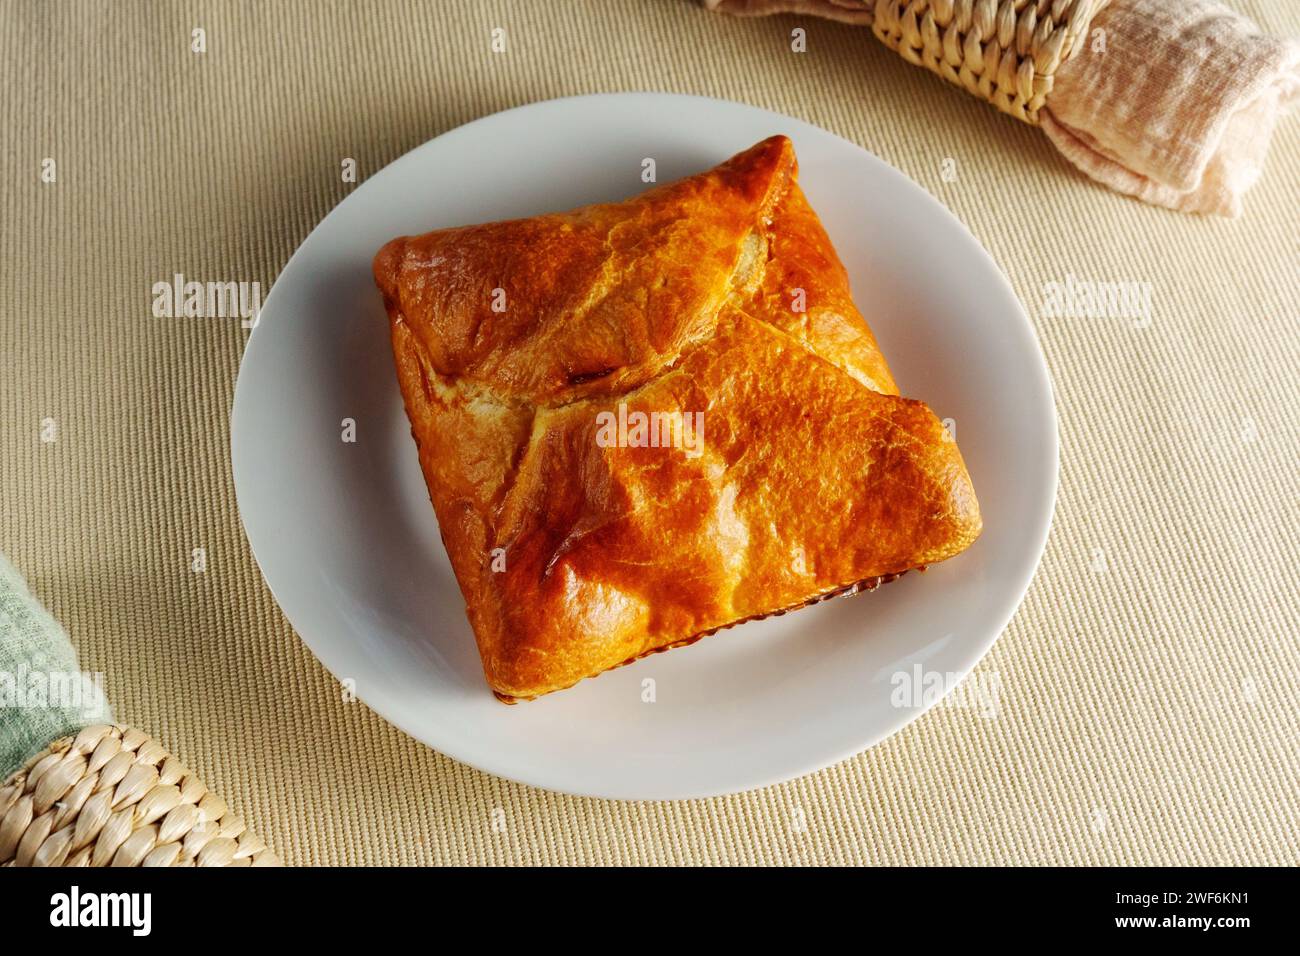 A visually stunning composition featuring a perfectly baked puff pastry adorning a pristine white plate. Stock Photo